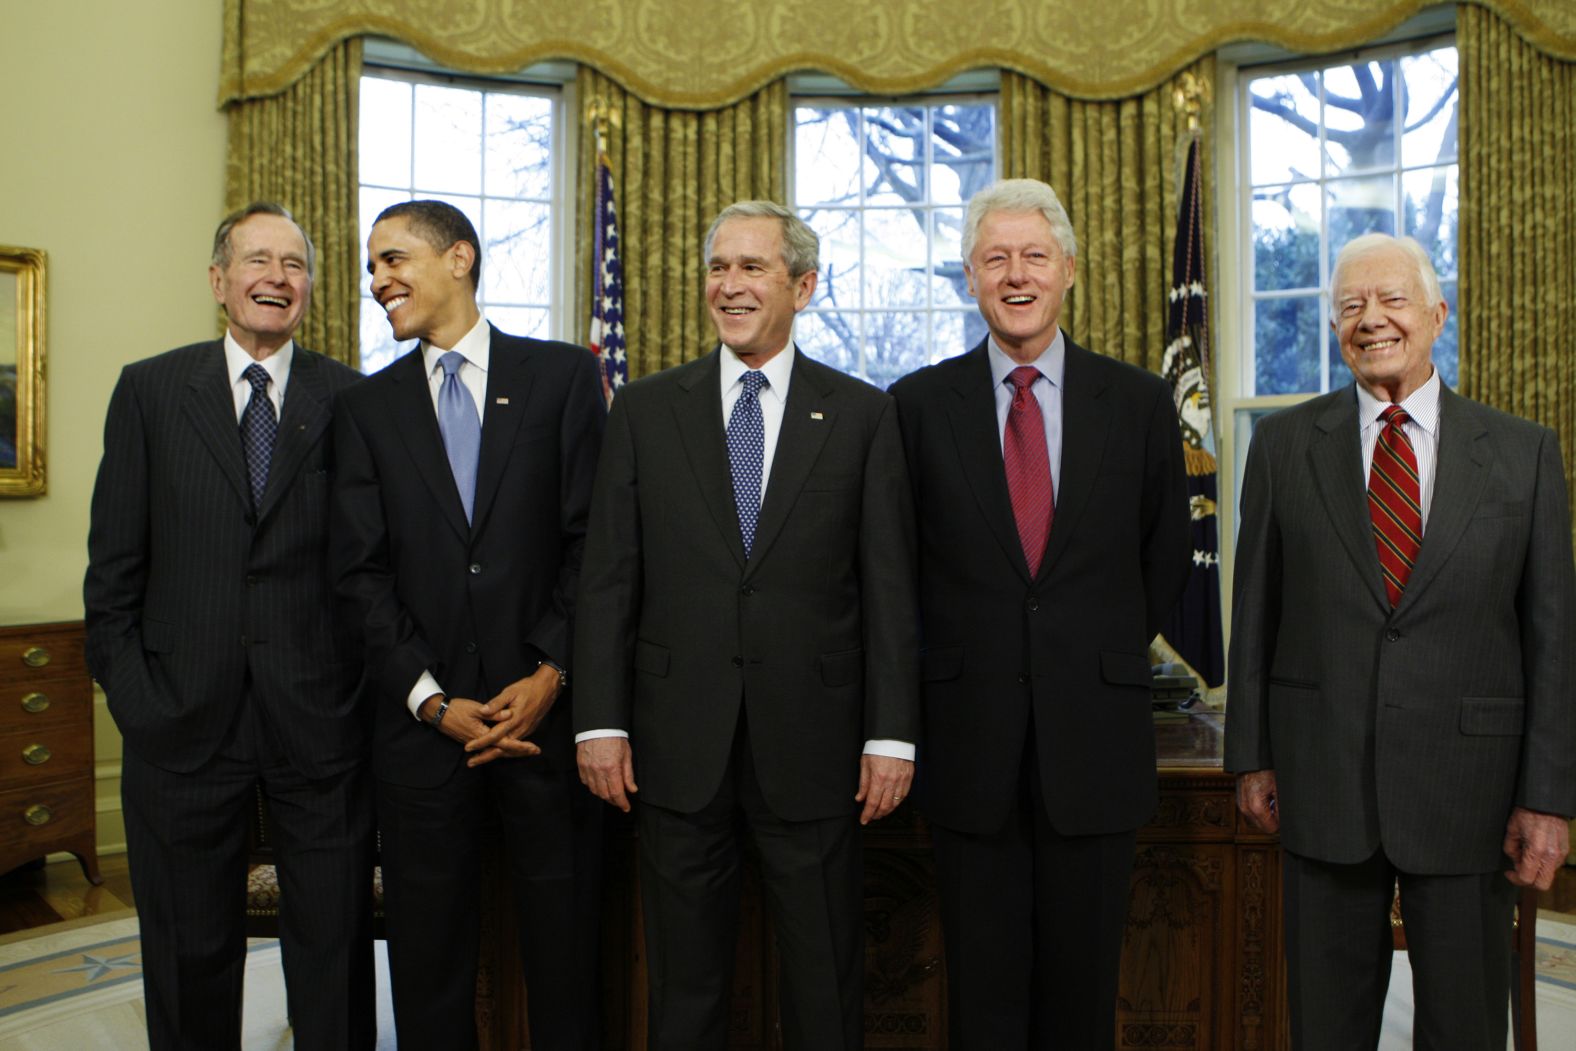 Carter meets with Obama and other former presidents at the White House in January 2009. From left are George H.W. Bush, Obama, George W. Bush, Clinton and Carter.